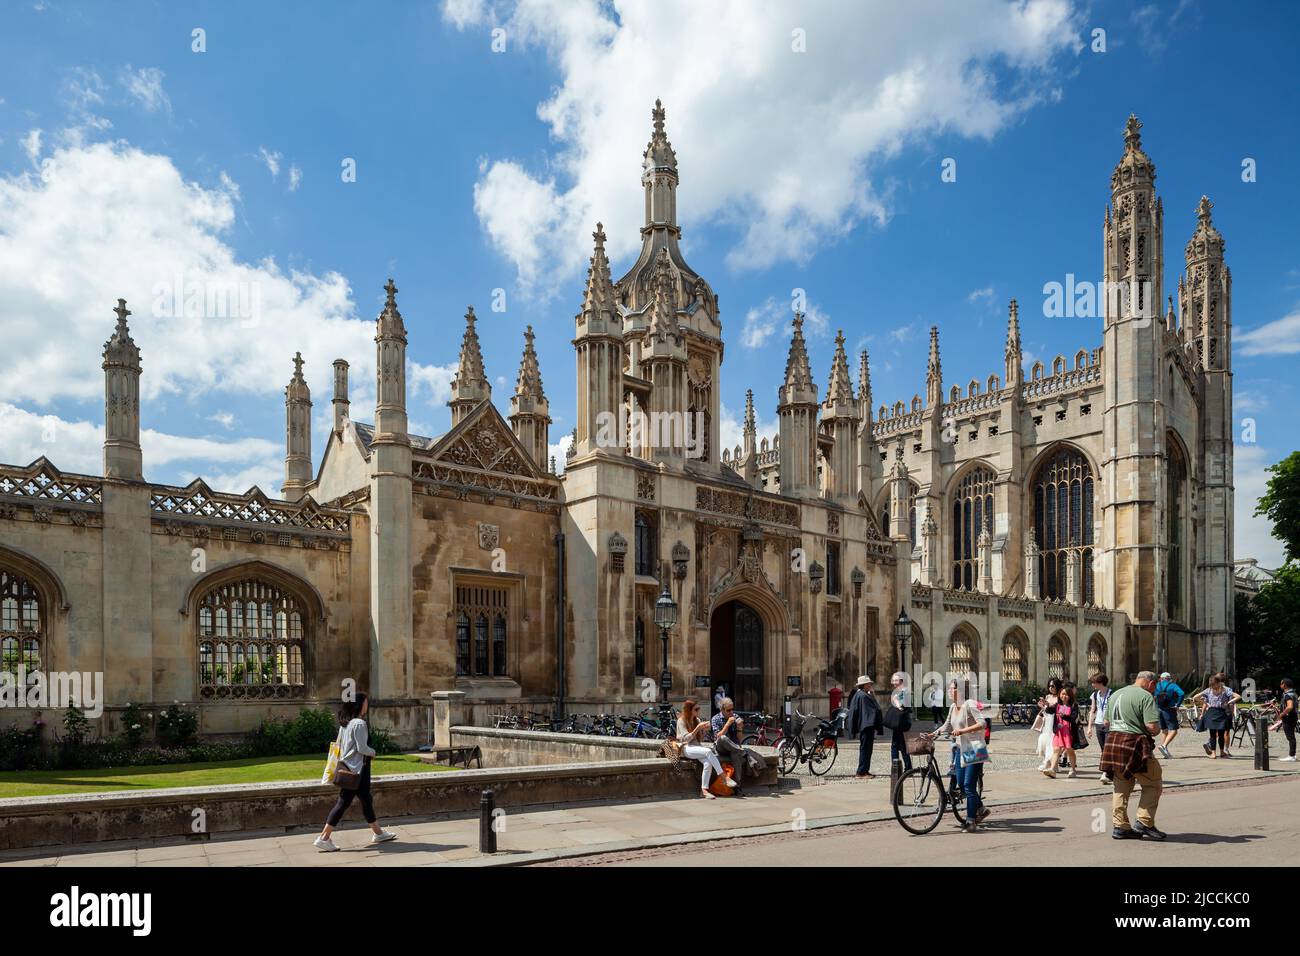 Spring afternoon at King's College in Cambridge, England. Stock Photo